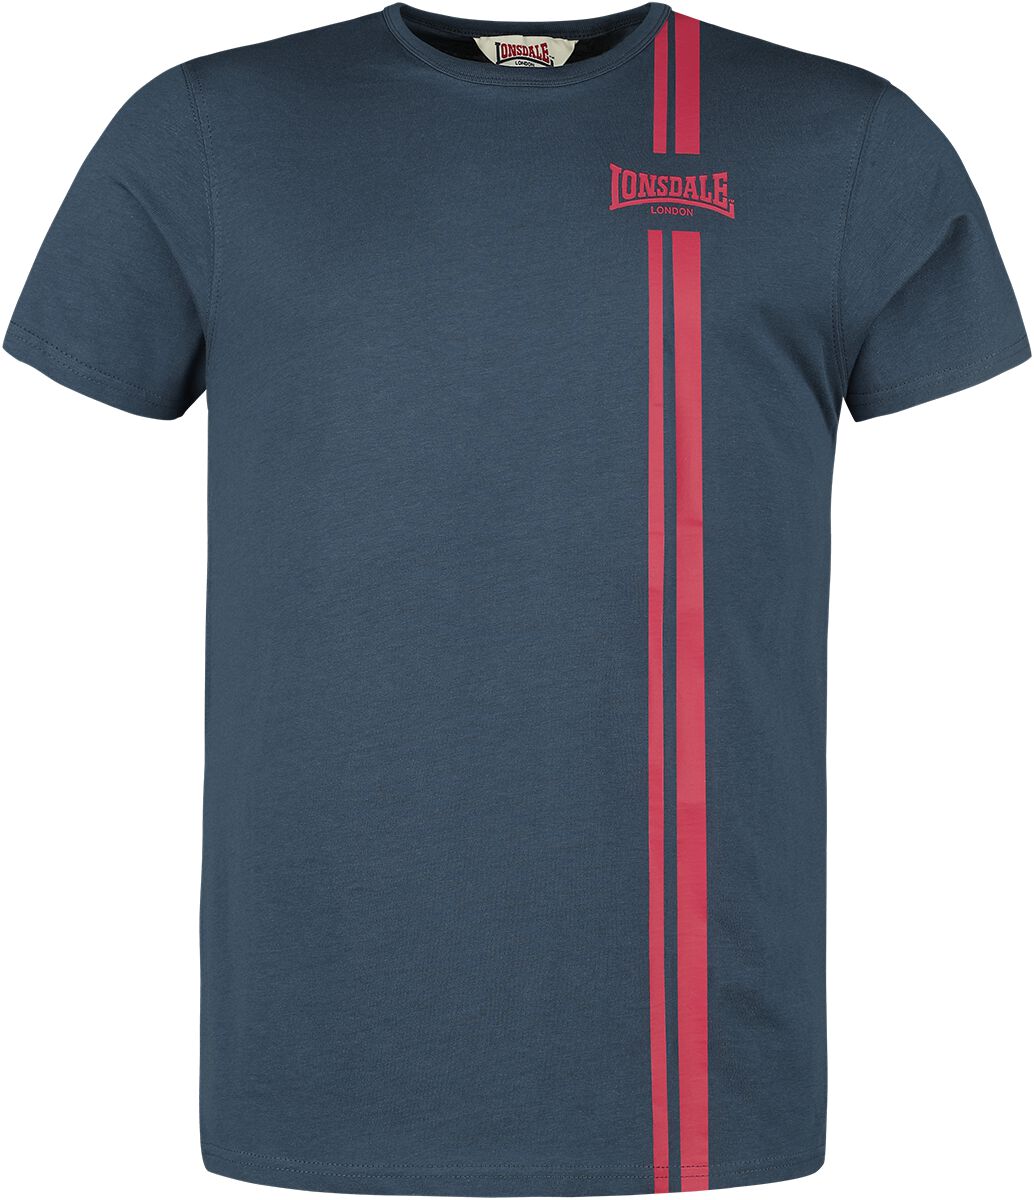 Lonsdale London INVERBROOM T-Shirt navy in S von Lonsdale London